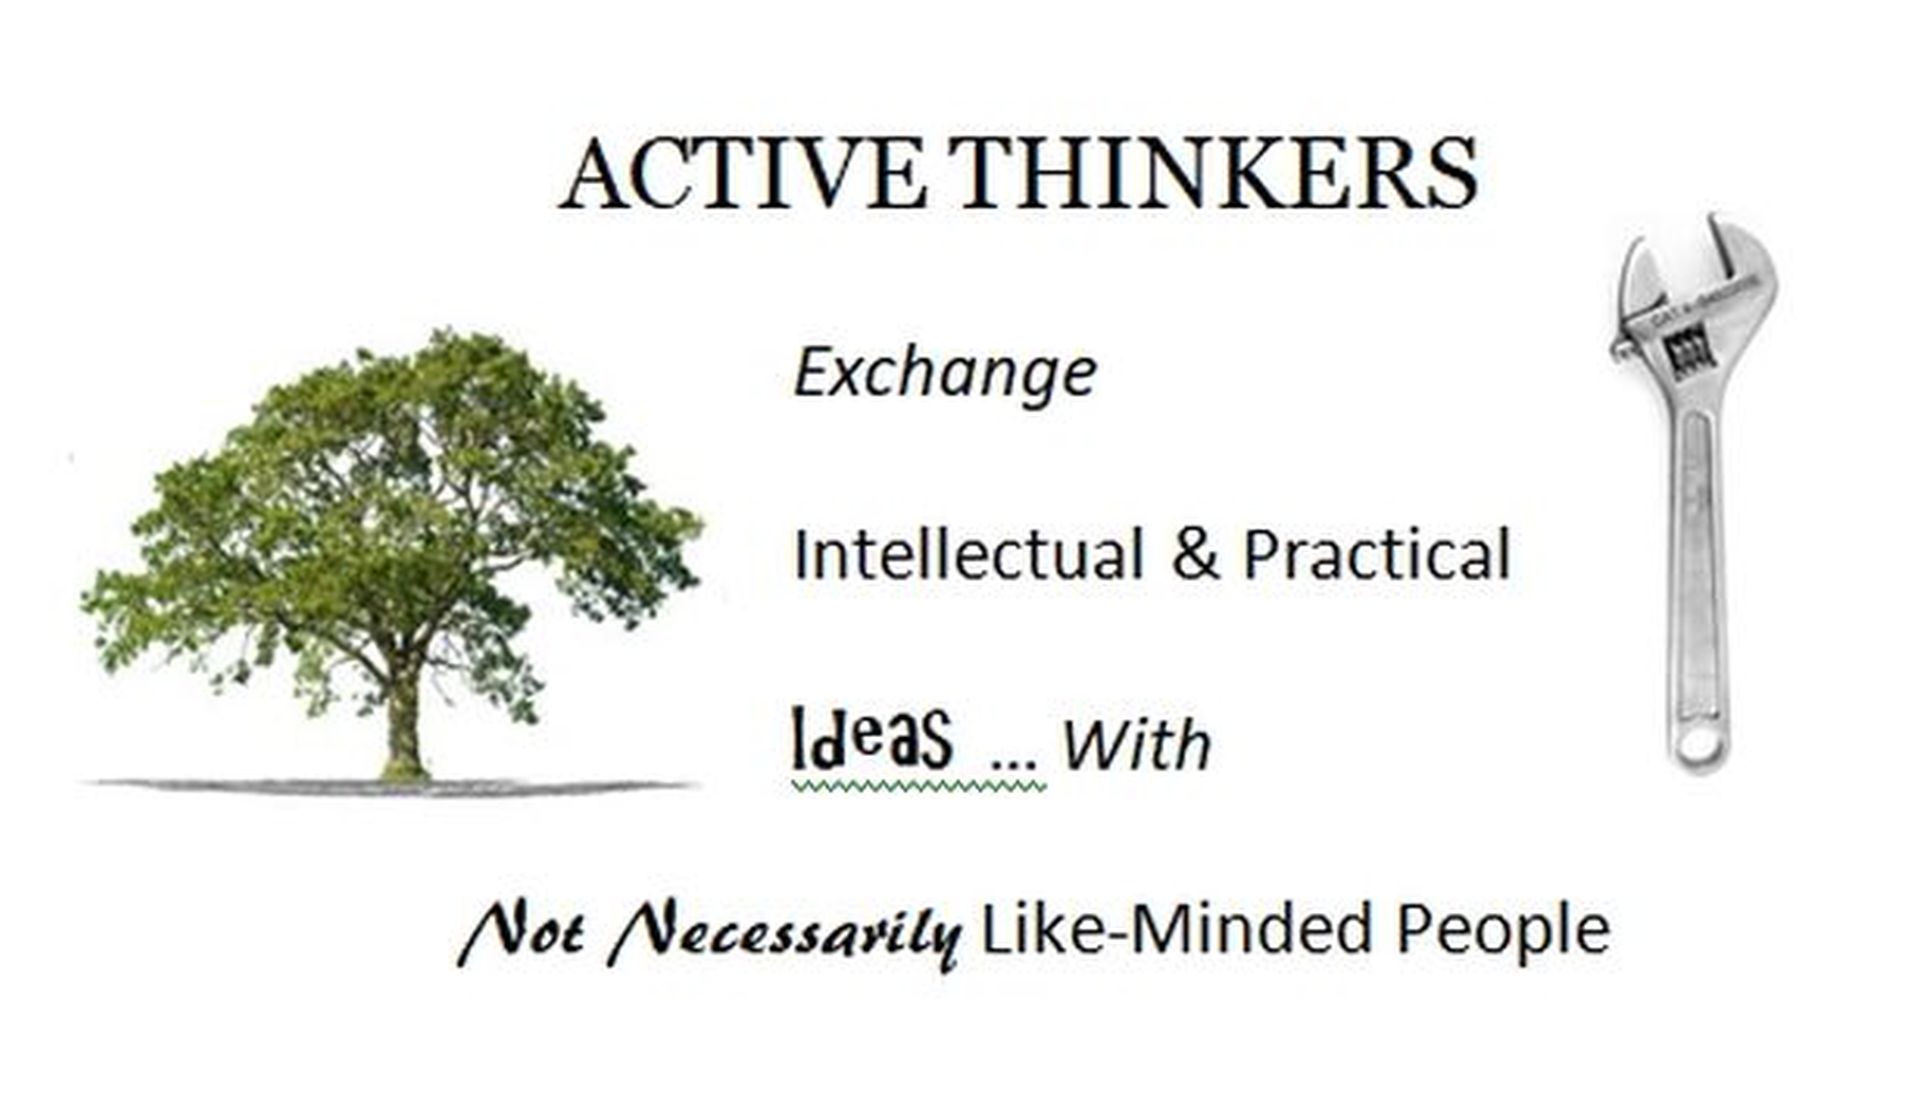 Active Thinkers For & Against